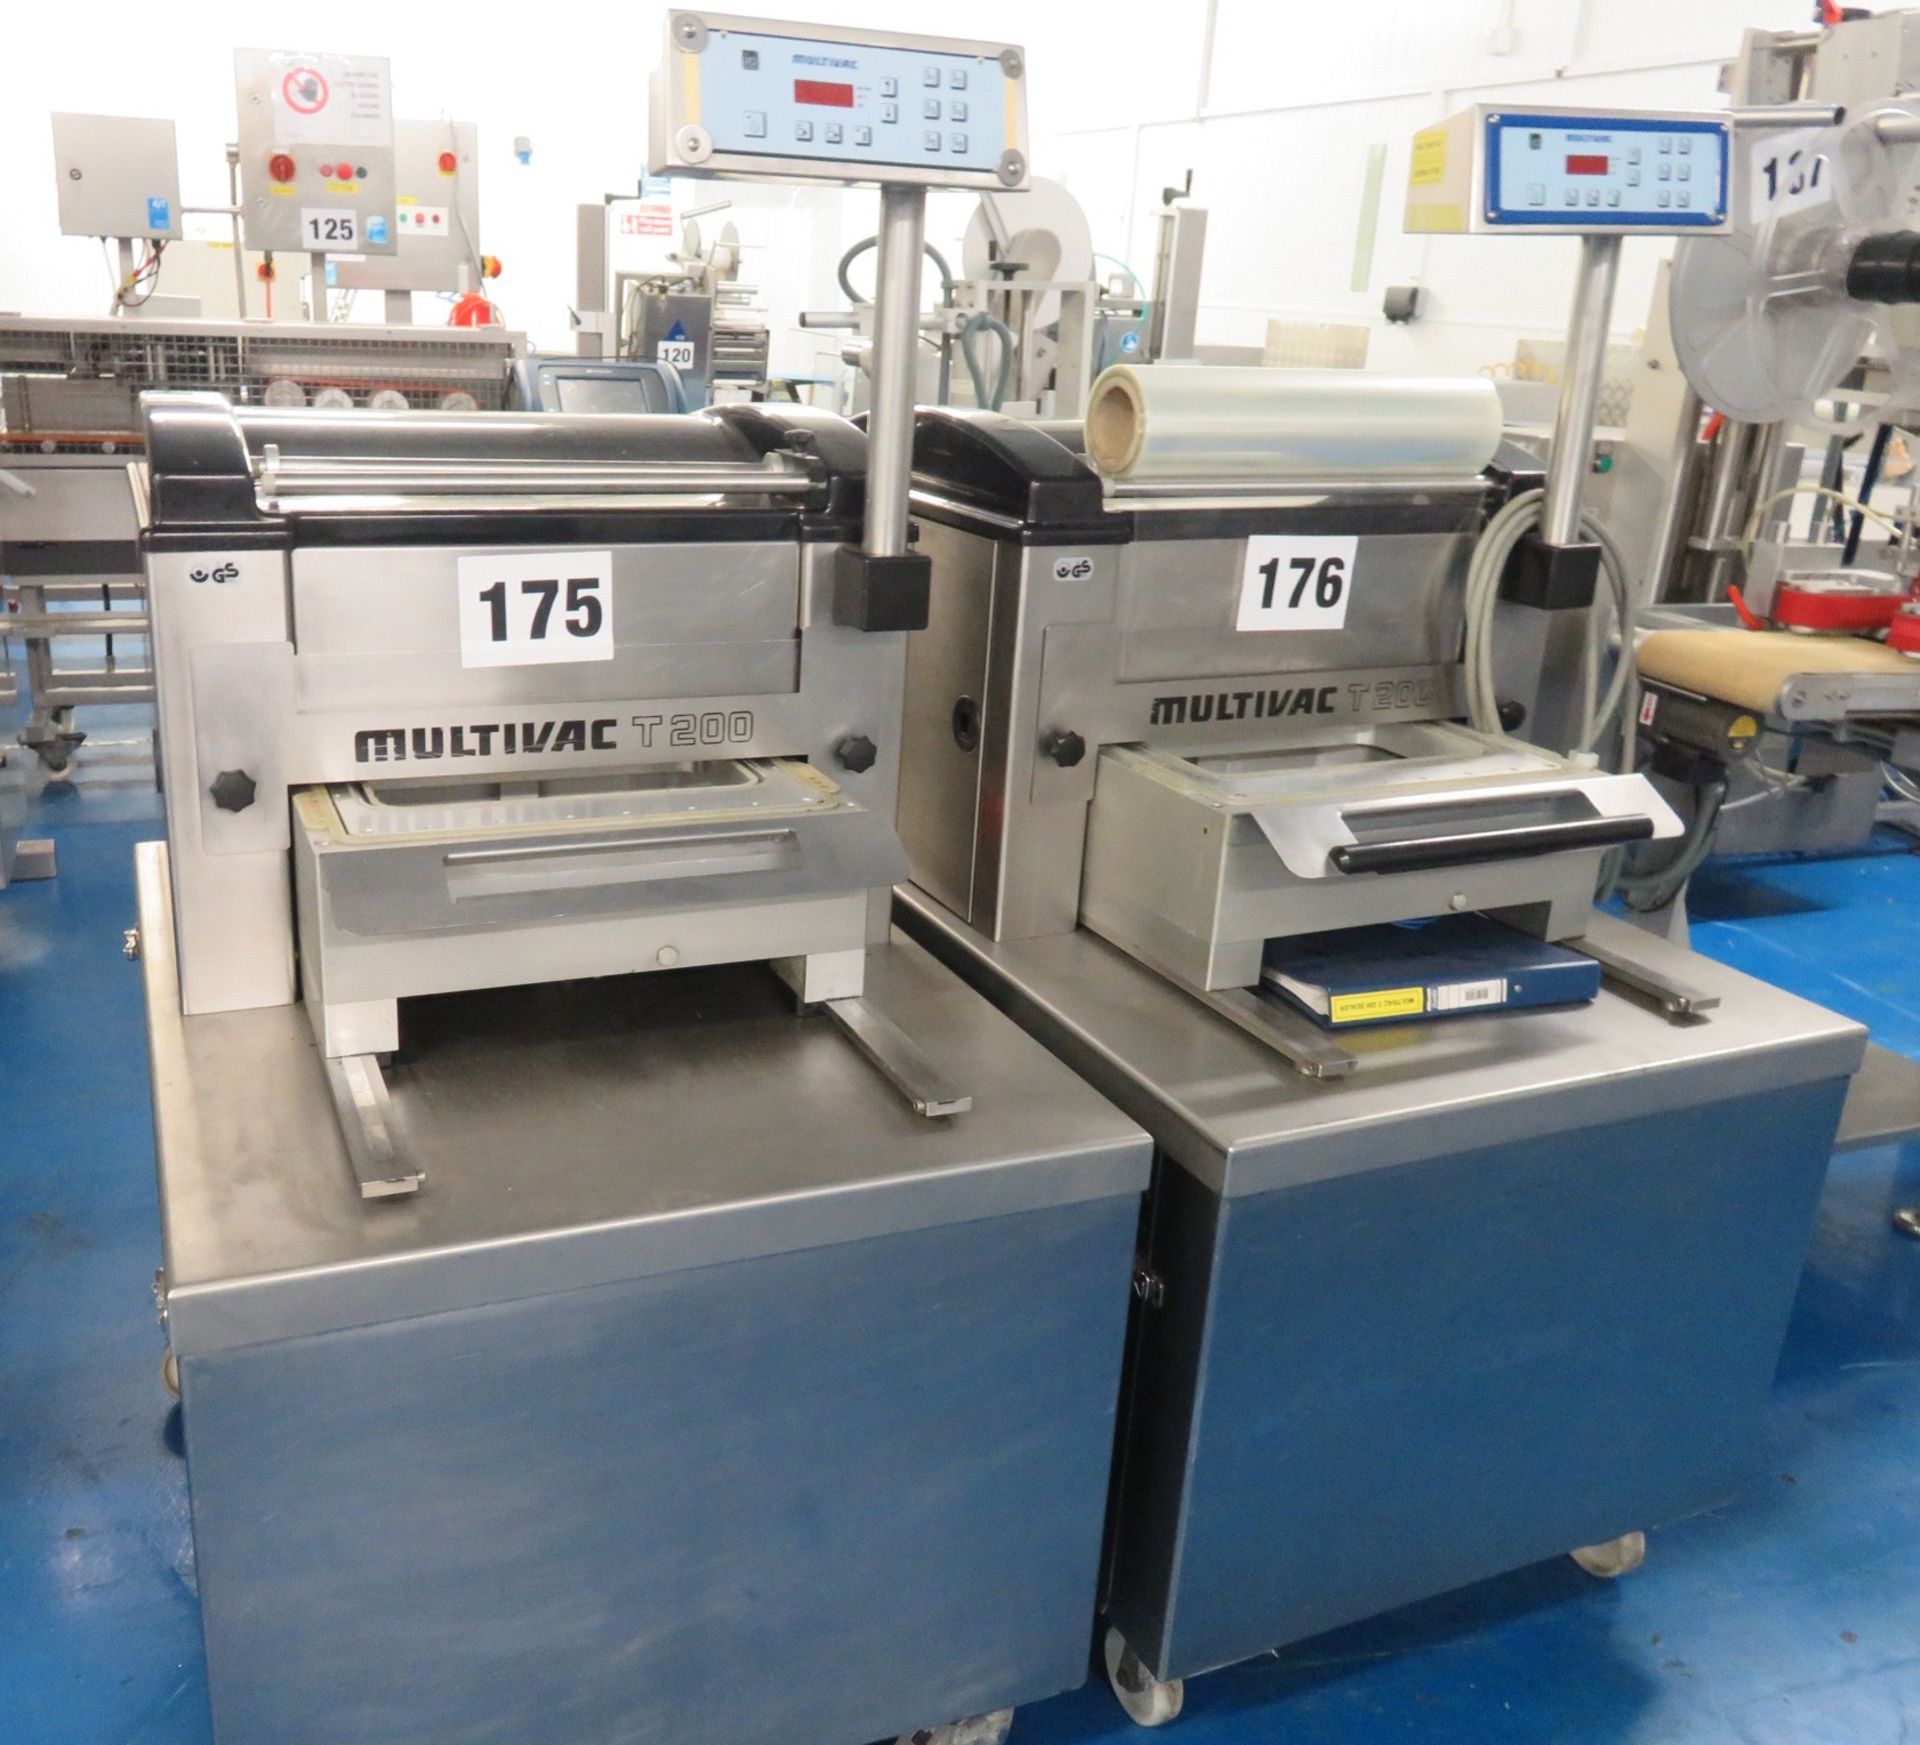 Multivac T200 Tray Sealing machine. Die size approx 345 x 190mm. LO £40 - Image 2 of 5